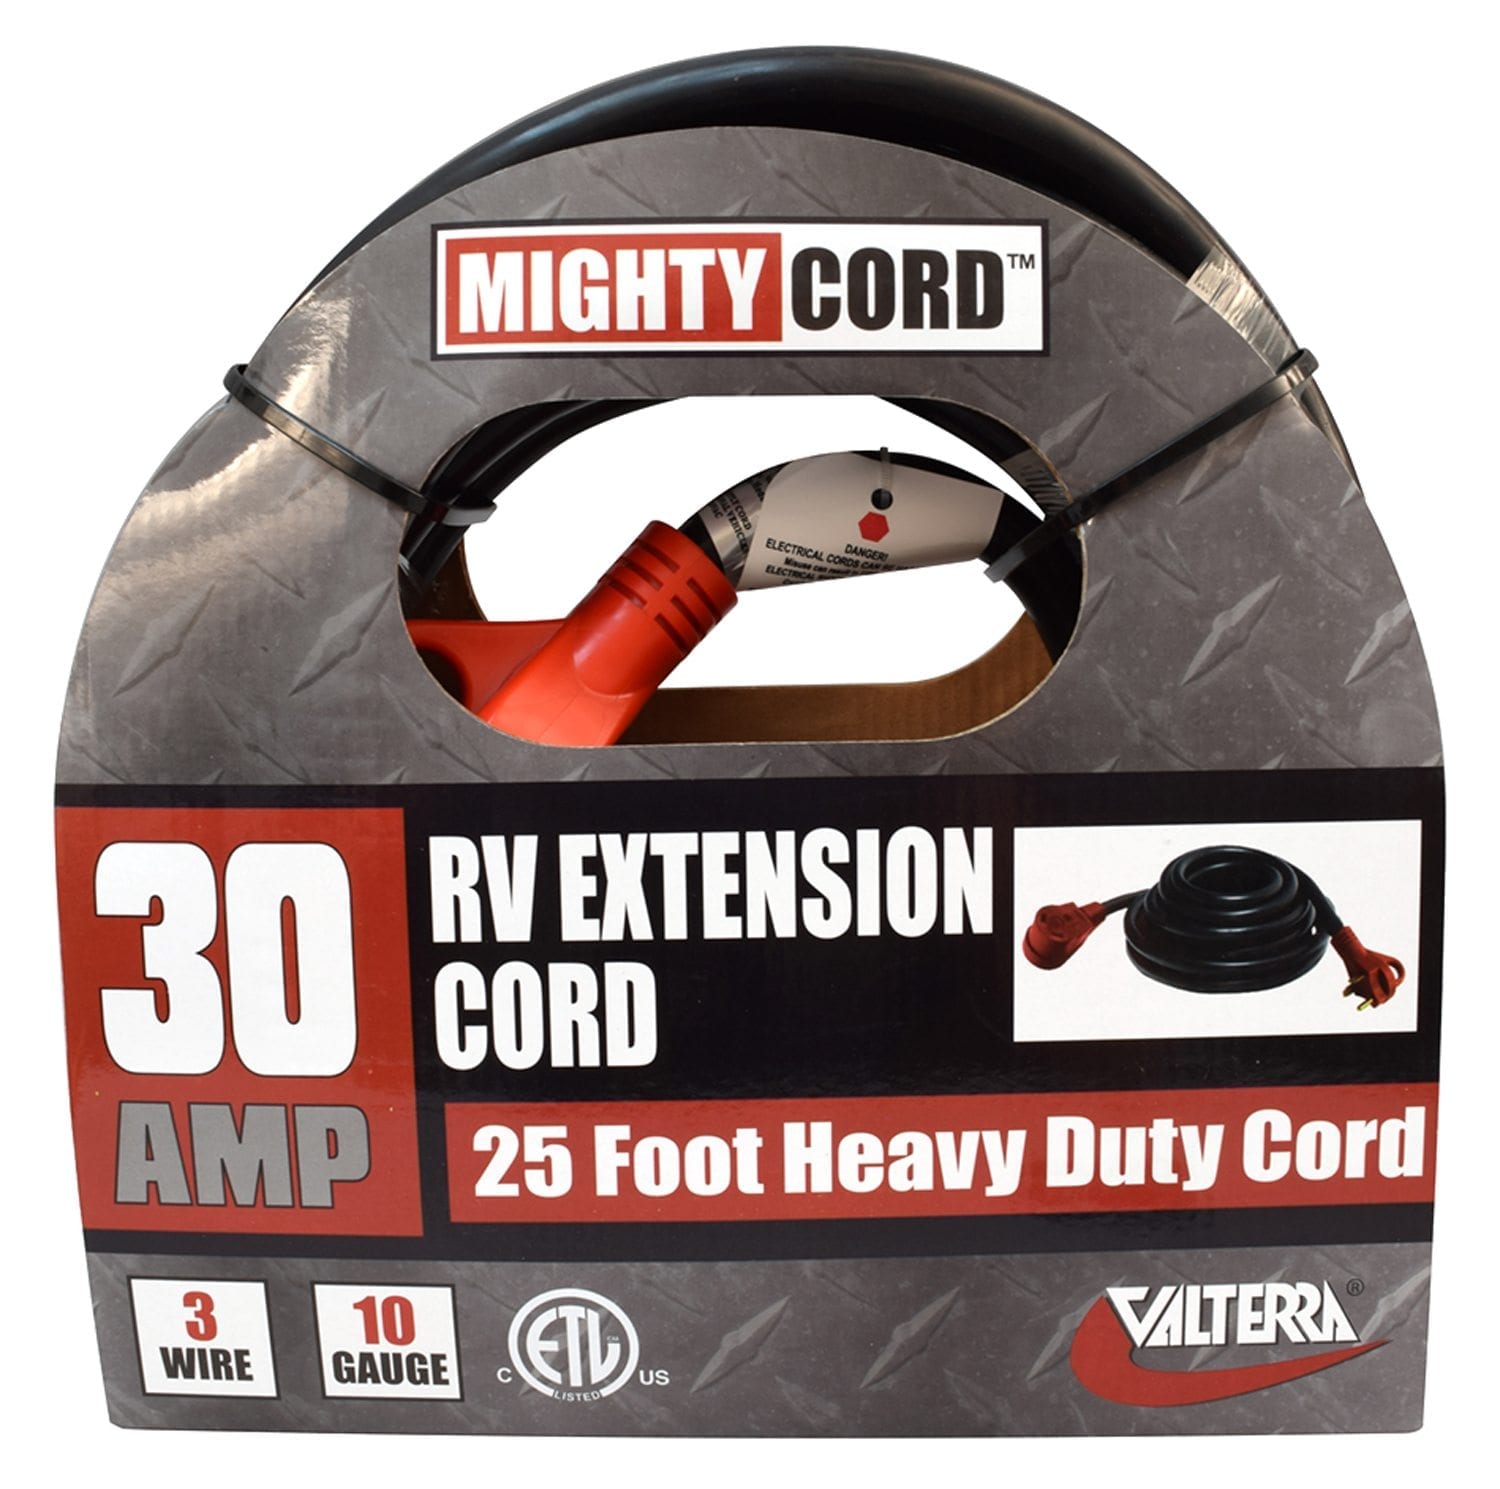 MIGHTY CORD 30A, 25'